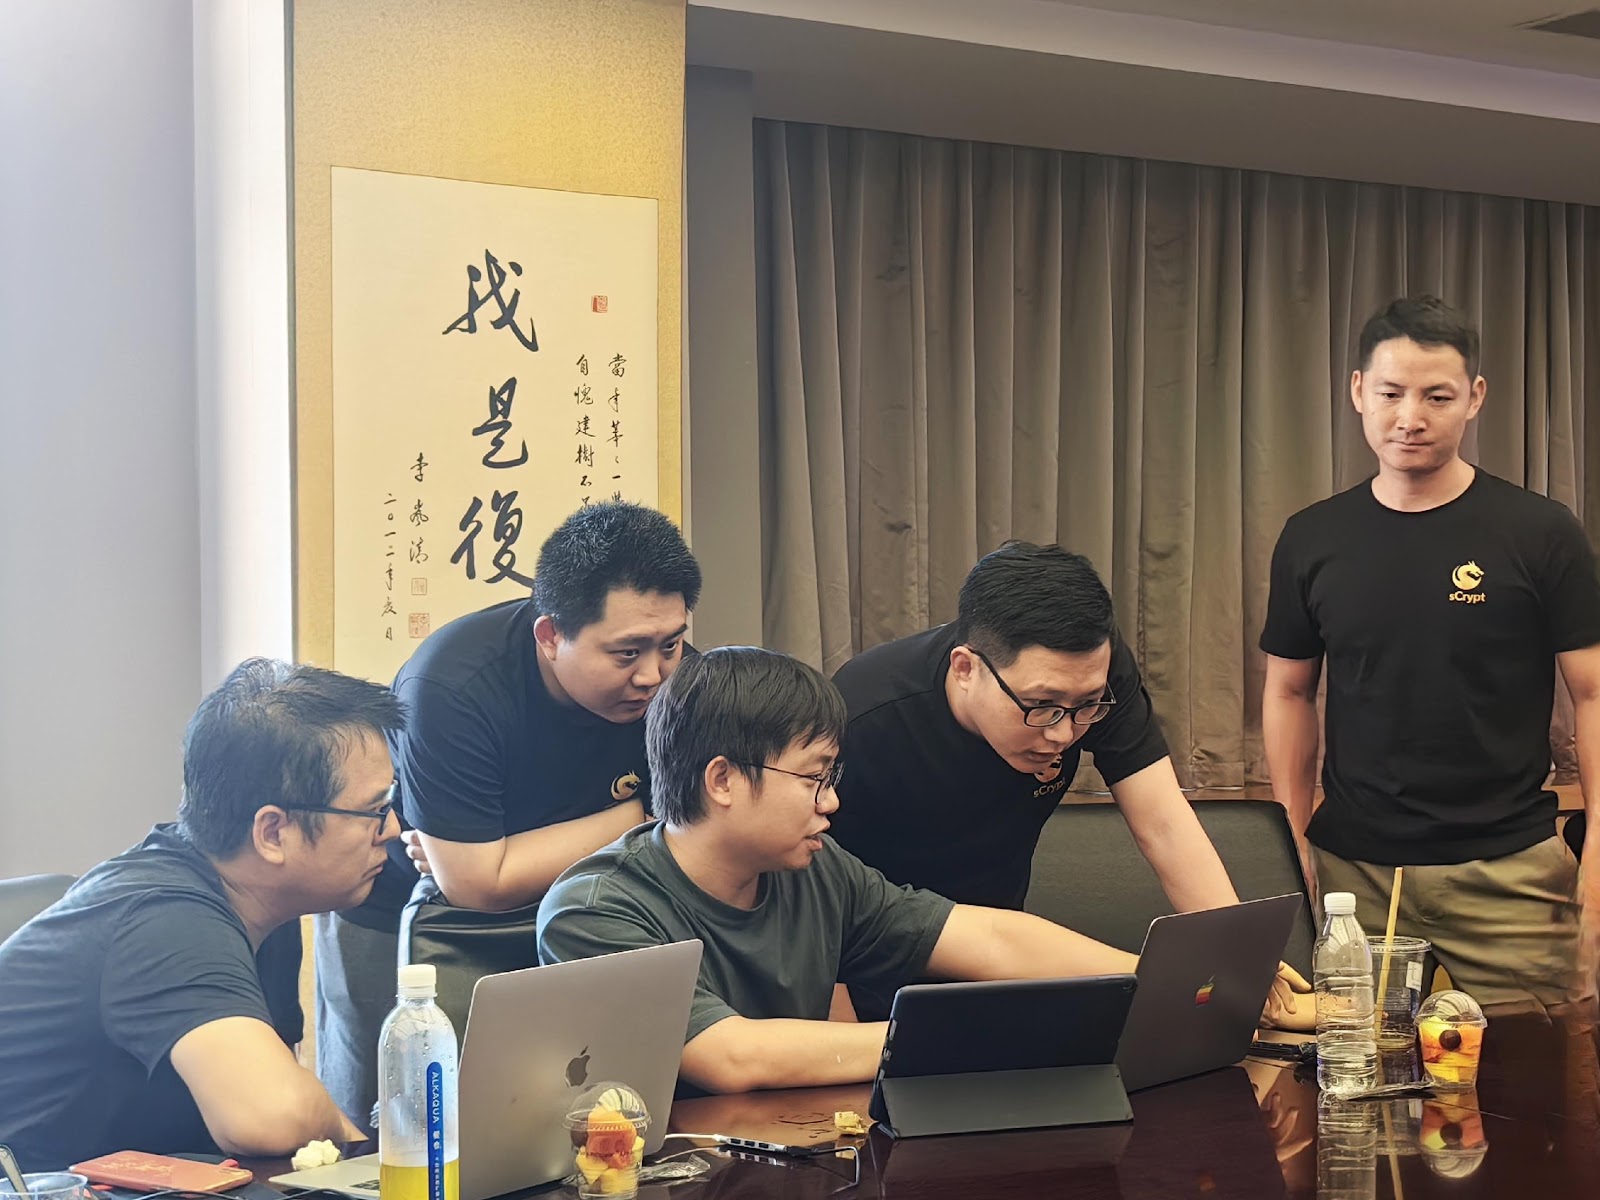 sCrypt successfully hosted BSV Hackathon at Fudan University.